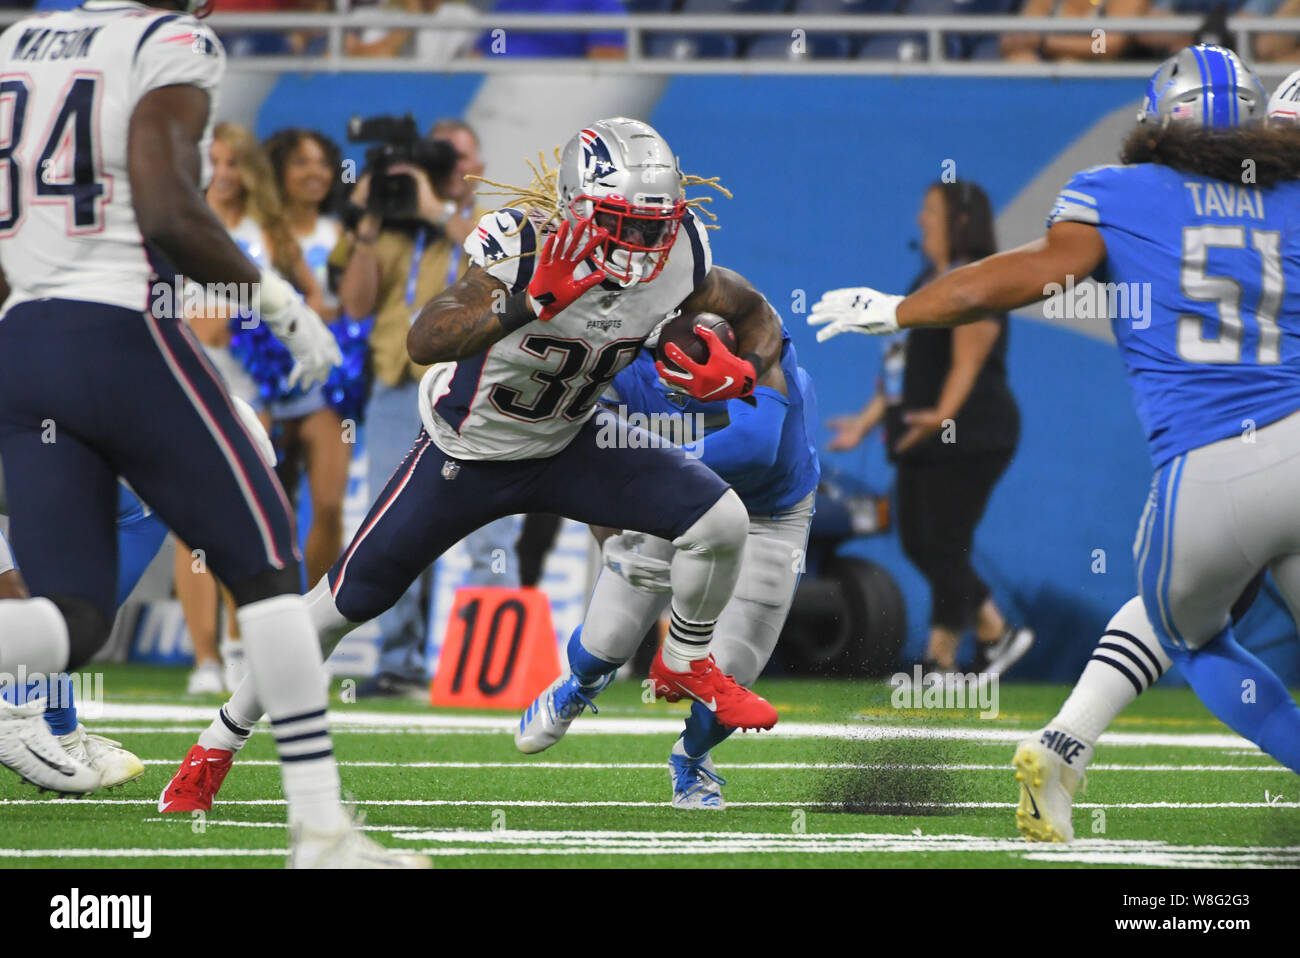 DETROIT, MI - AUGUST 8: New England Patriots RB Brandon Bolden (38) carries the ball during NFL pre-season game between New England Patriots and Detroit Lions on August 8, 2019 at Ford Field in Detroit, MI (Photo by Allan Dranberg/CSM) Stock Photo